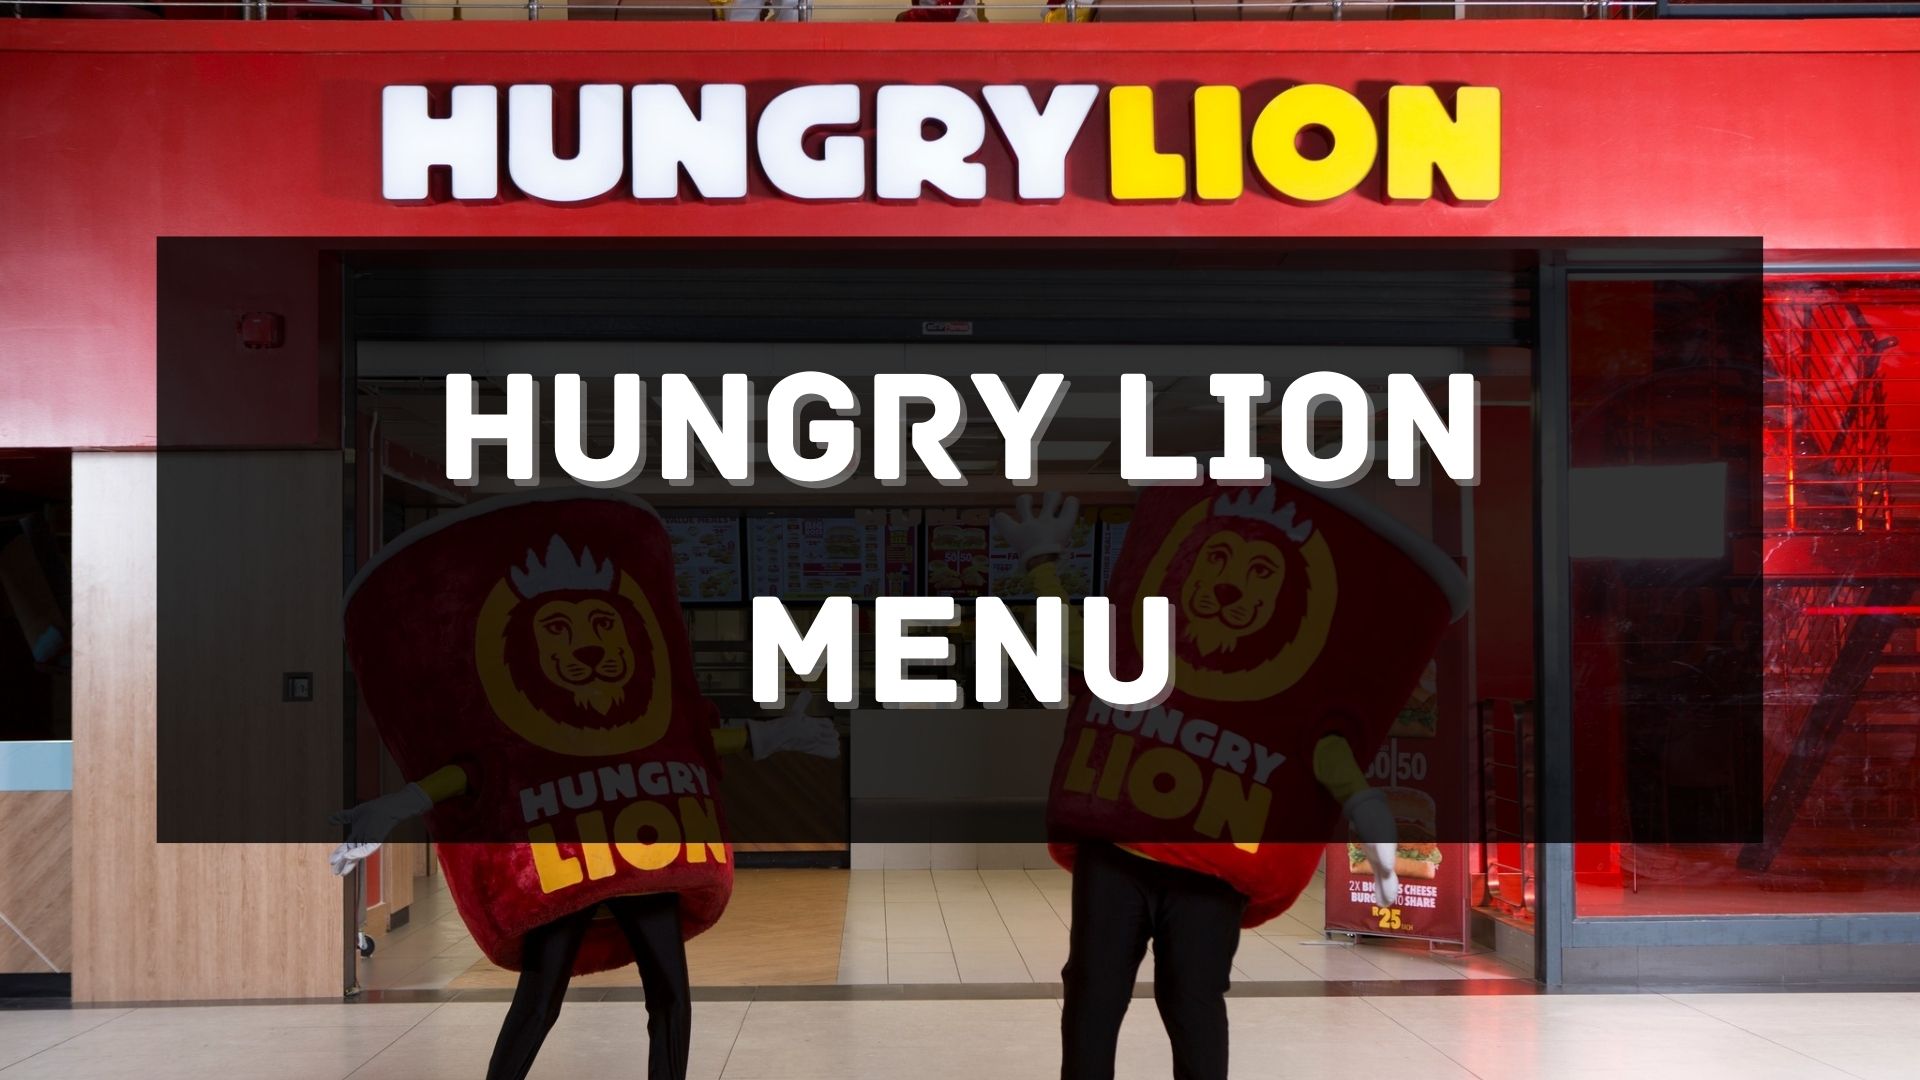 Hungry Lion Menu South Africa